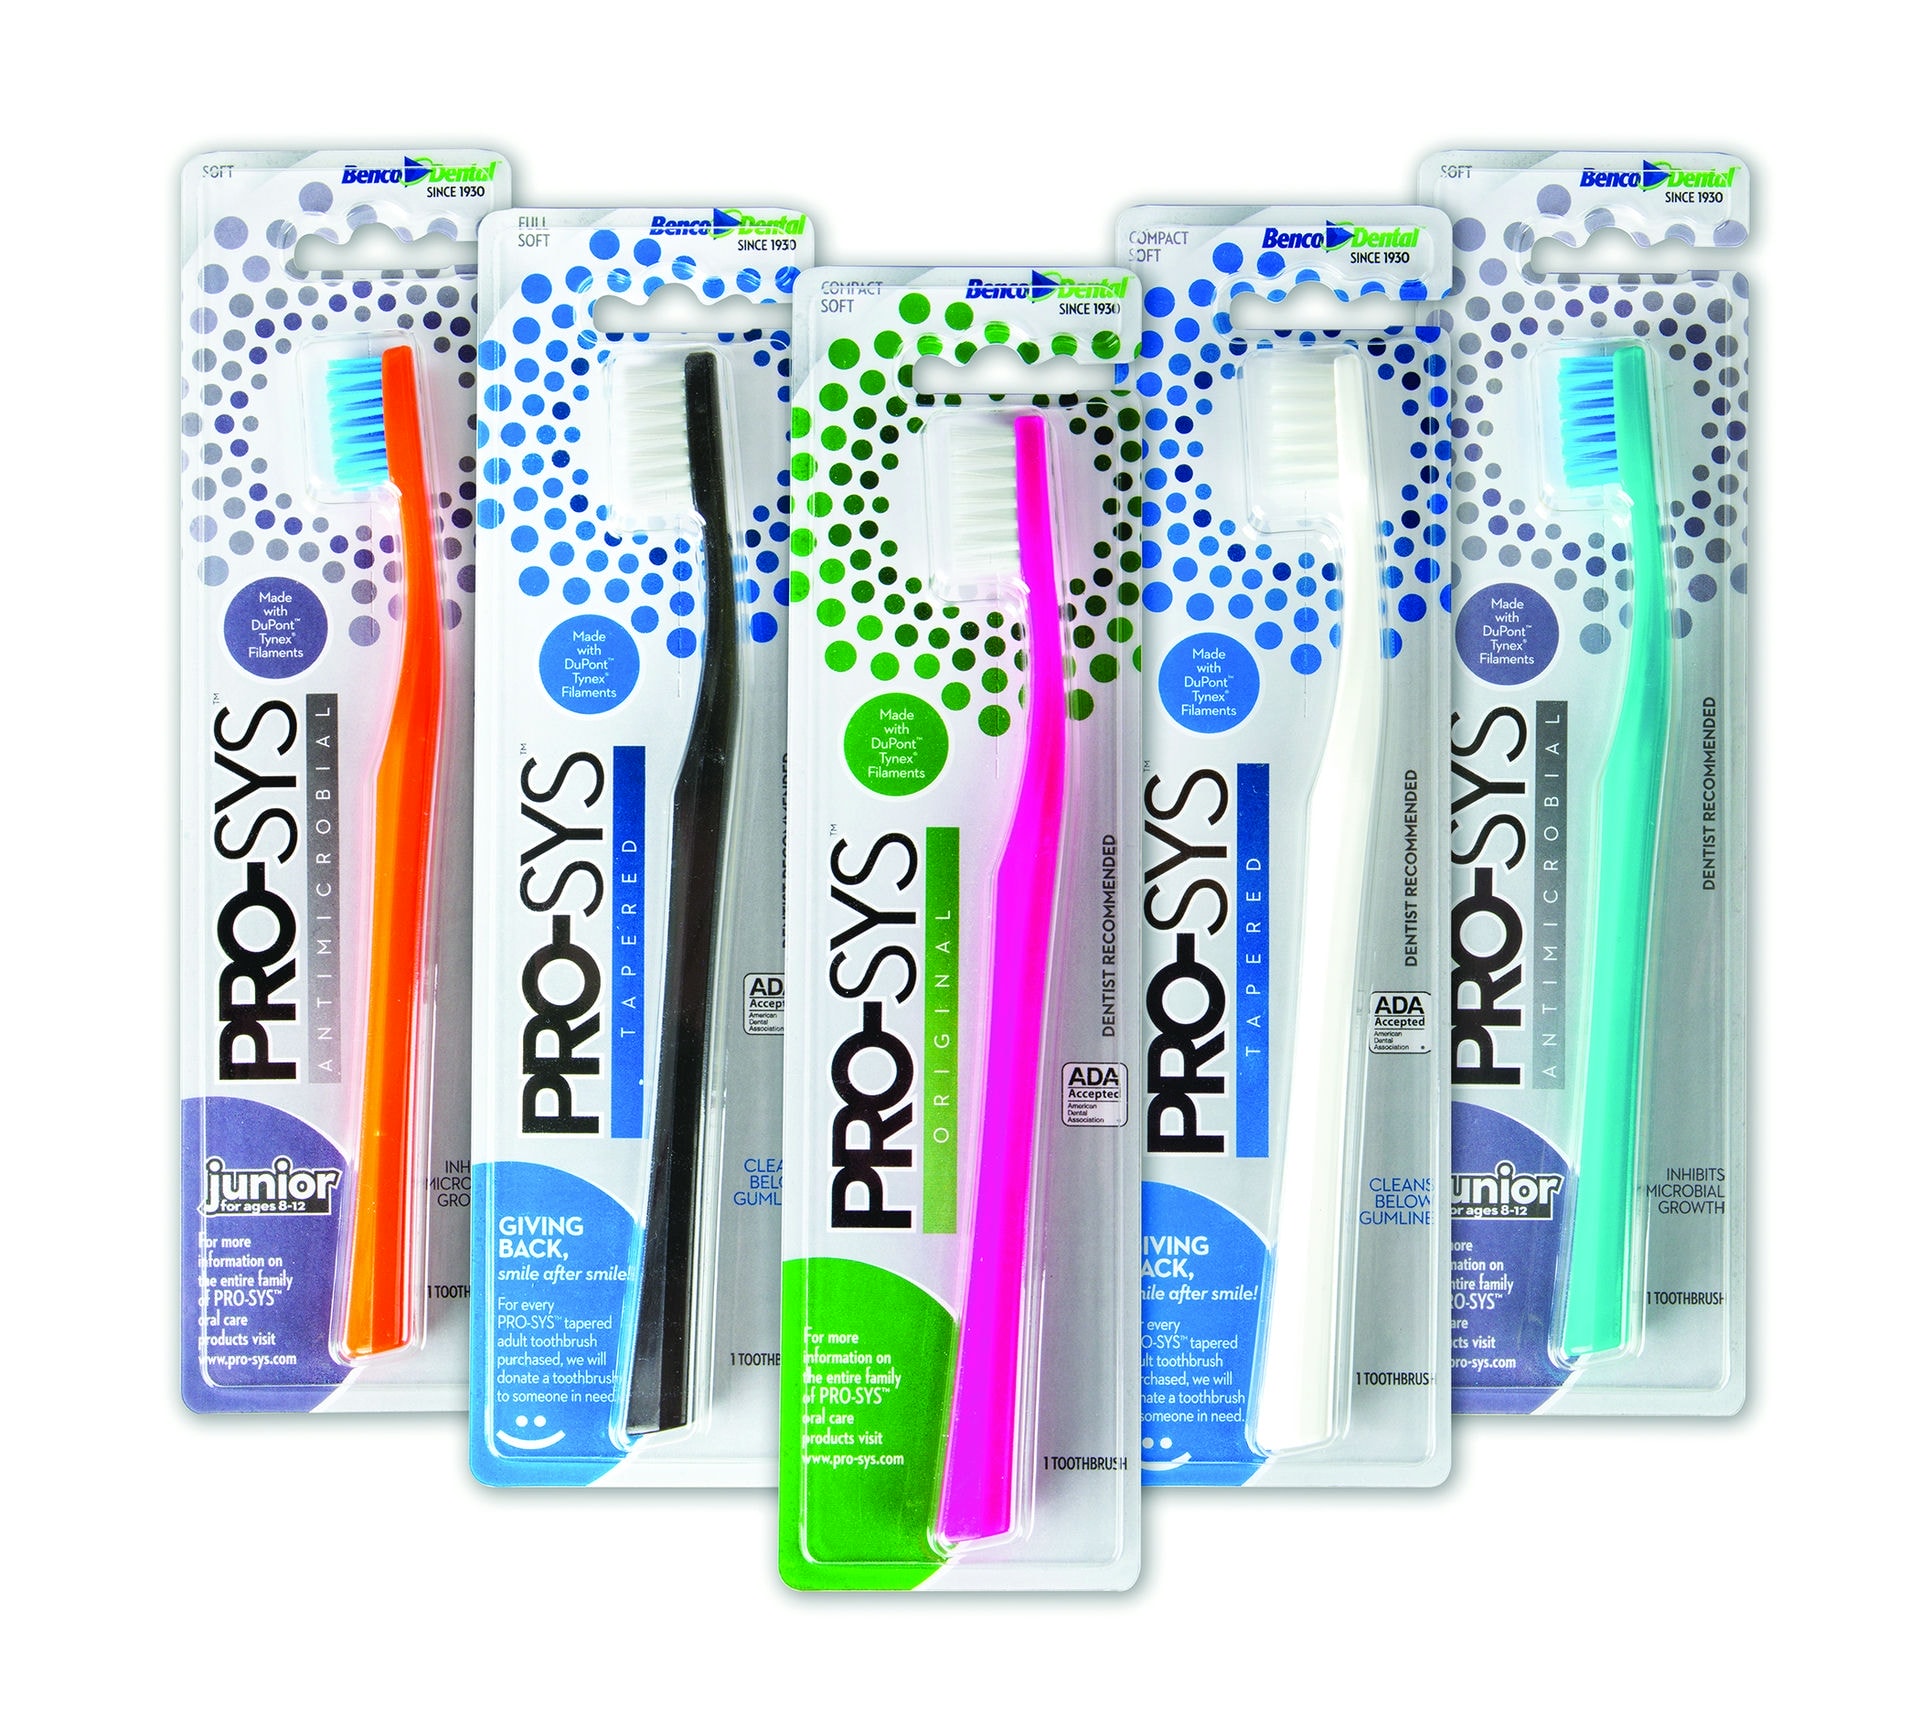 The unique PRO-SYS toothbrush, three years in the making, was shown to substantially reduce debris accumulation and bacterial contamination after prolonged use, in a recent study completed by The Dental Advisor (https://www.pro-sys.com/study/).